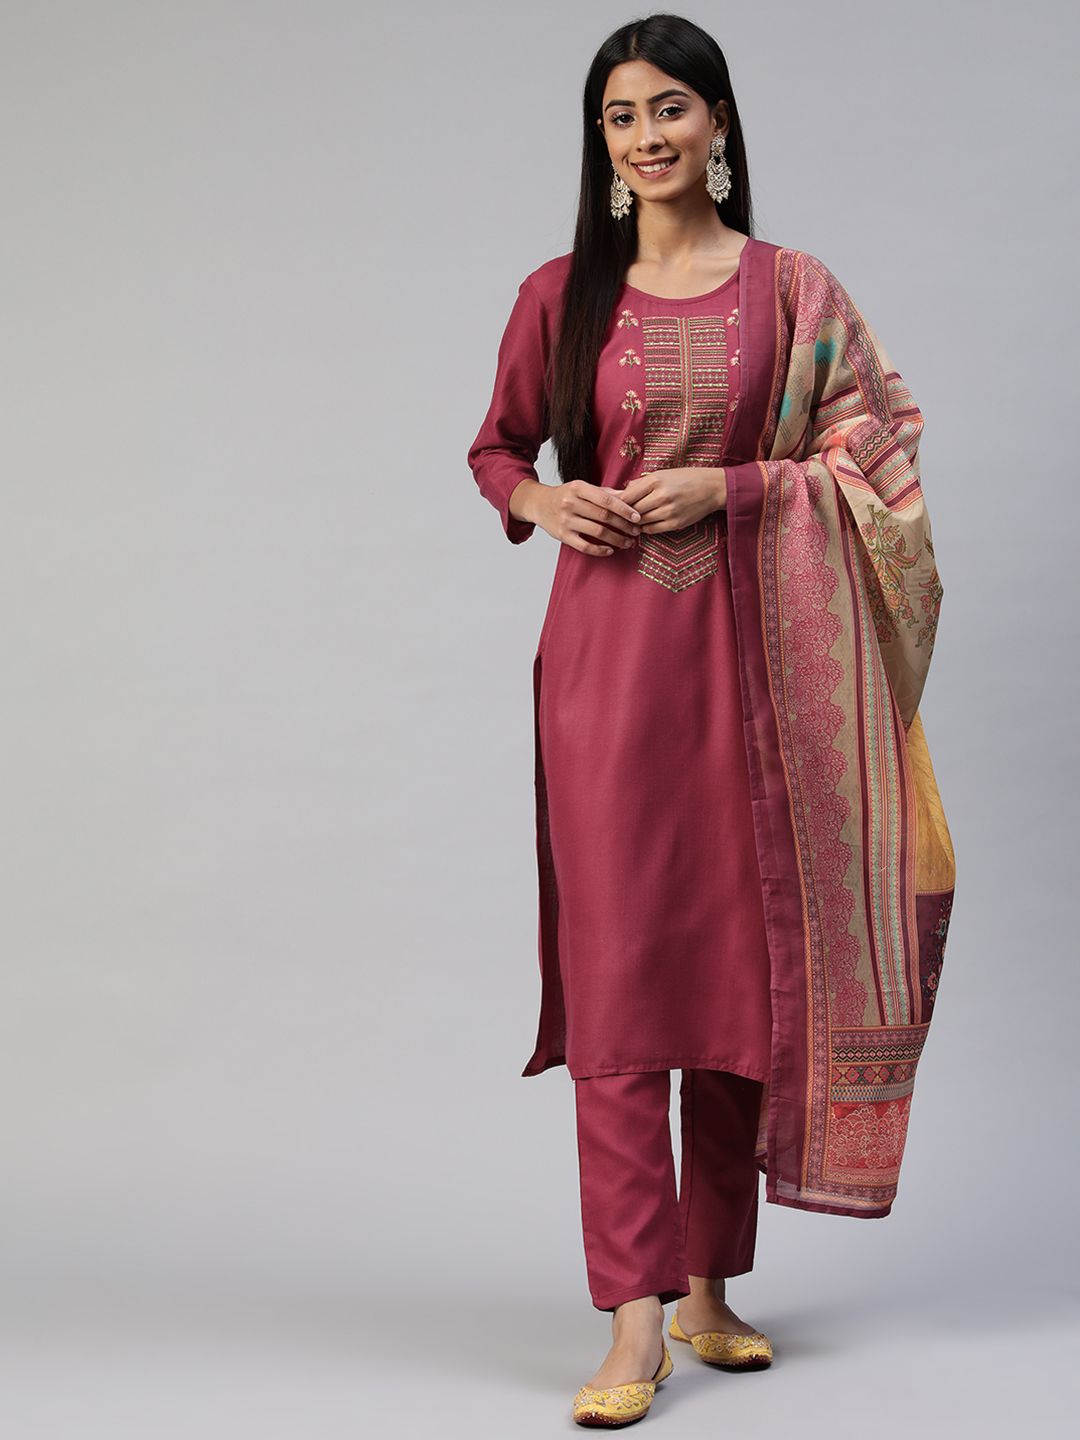 SheWill Magenta Embroidered Unstitched Dress Material Price in India